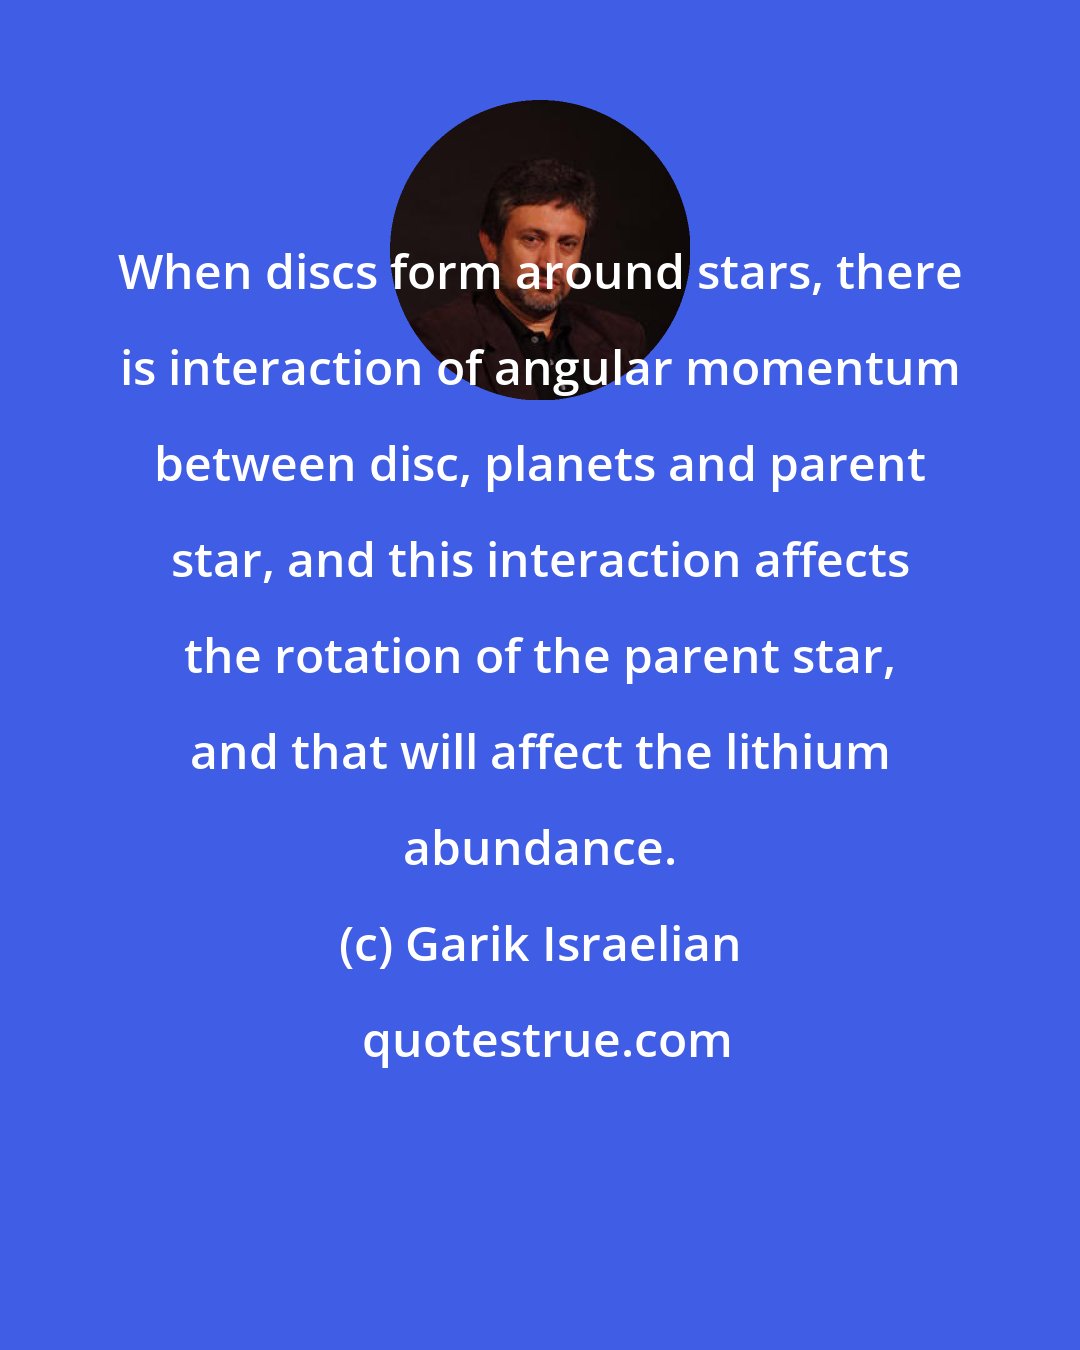 Garik Israelian: When discs form around stars, there is interaction of angular momentum between disc, planets and parent star, and this interaction affects the rotation of the parent star, and that will affect the lithium abundance.